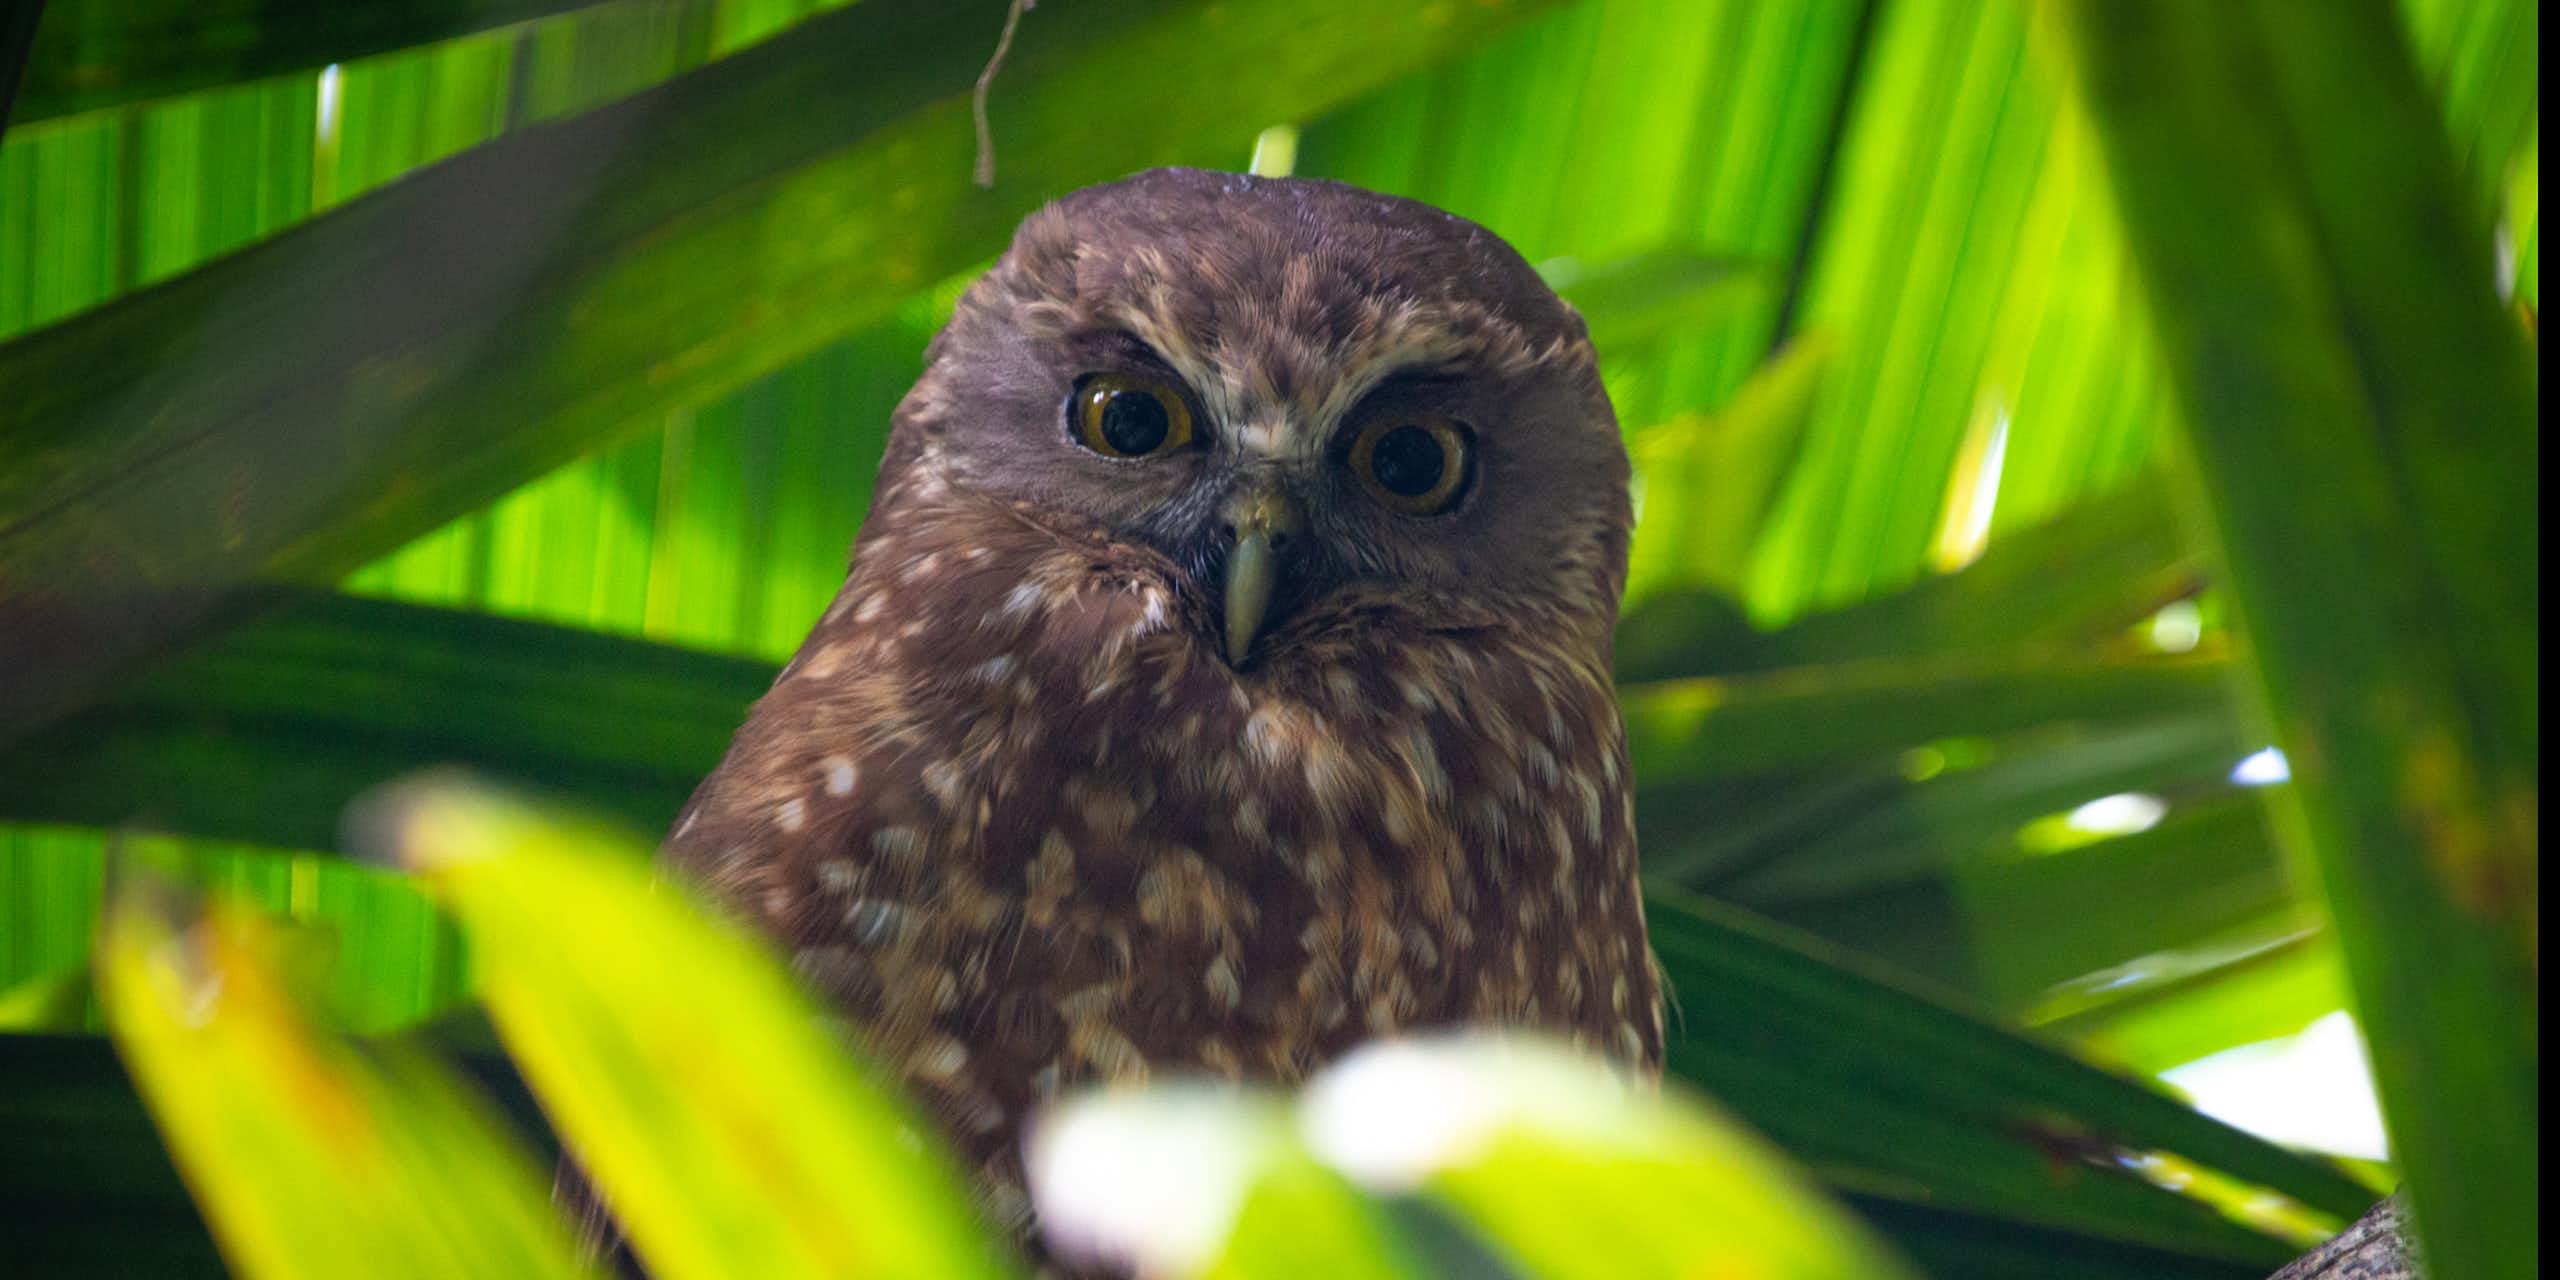 A Norfolk Island morepork facing the camera, surrounded in green foliage